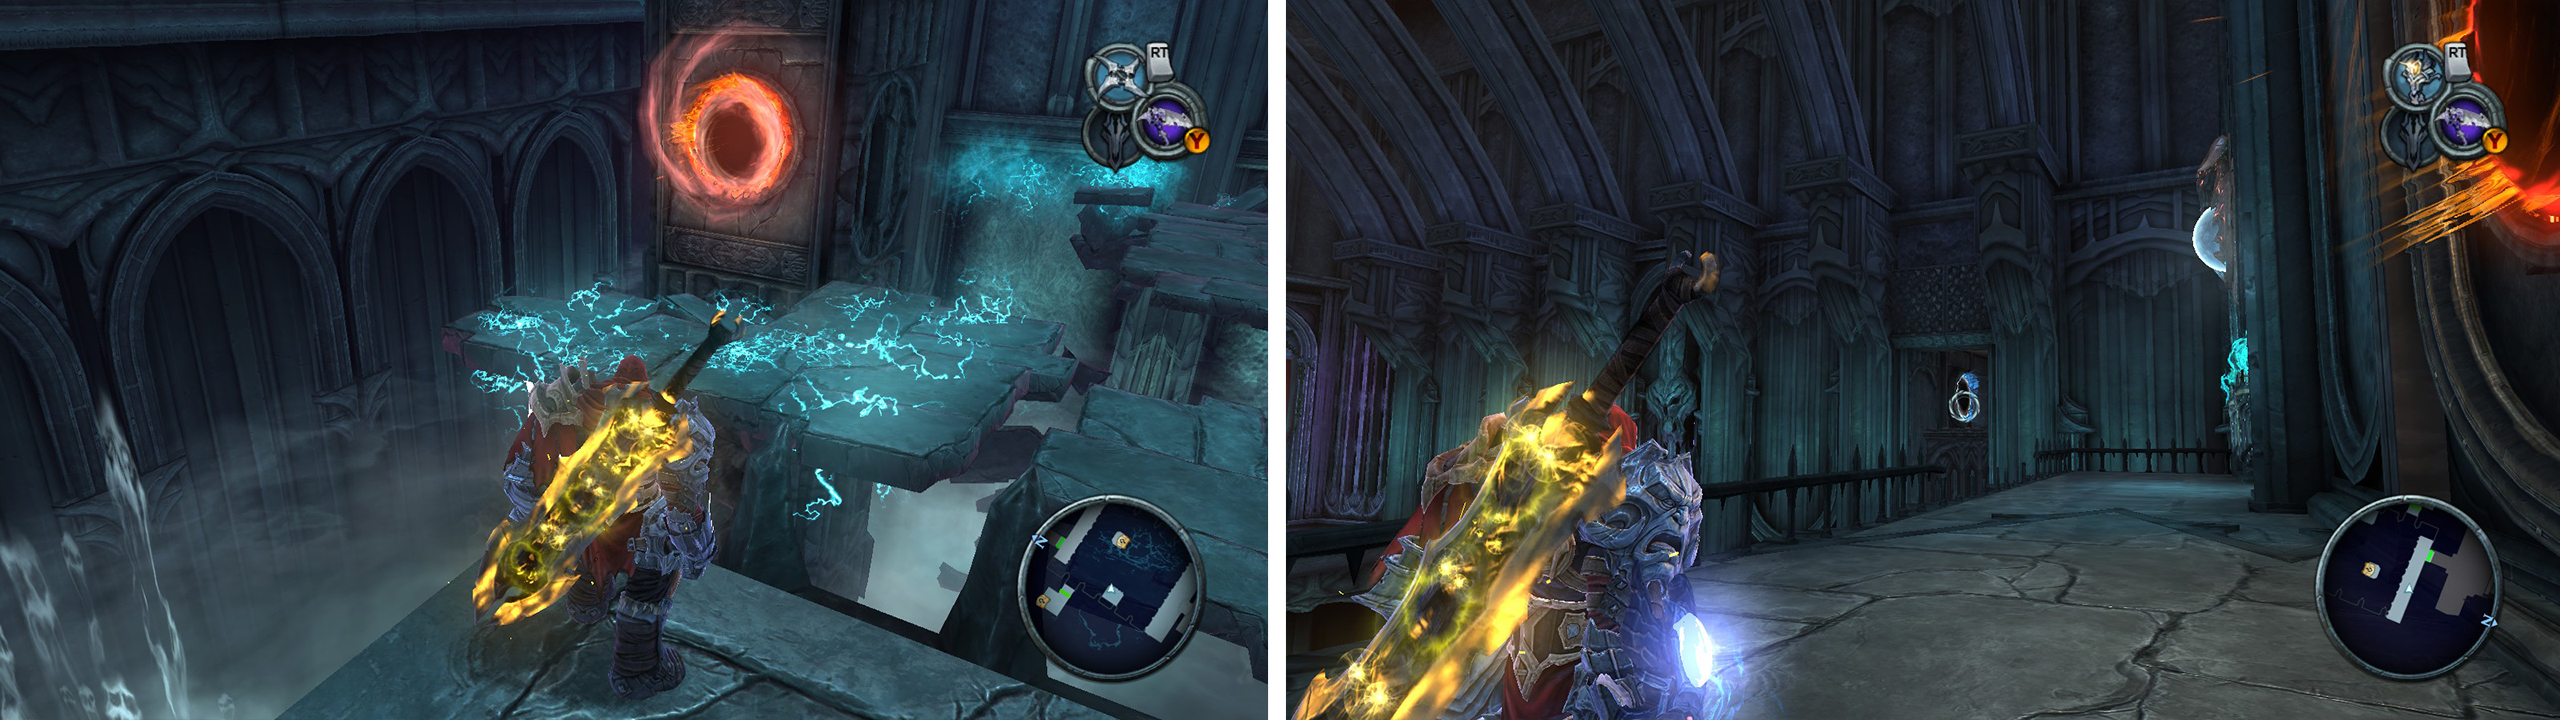 Hop through the portal on the central pillar (left) to reach the far side. From here, look for an alcove in the west wall for another portal pad (right) leading to a Wrath Shard.